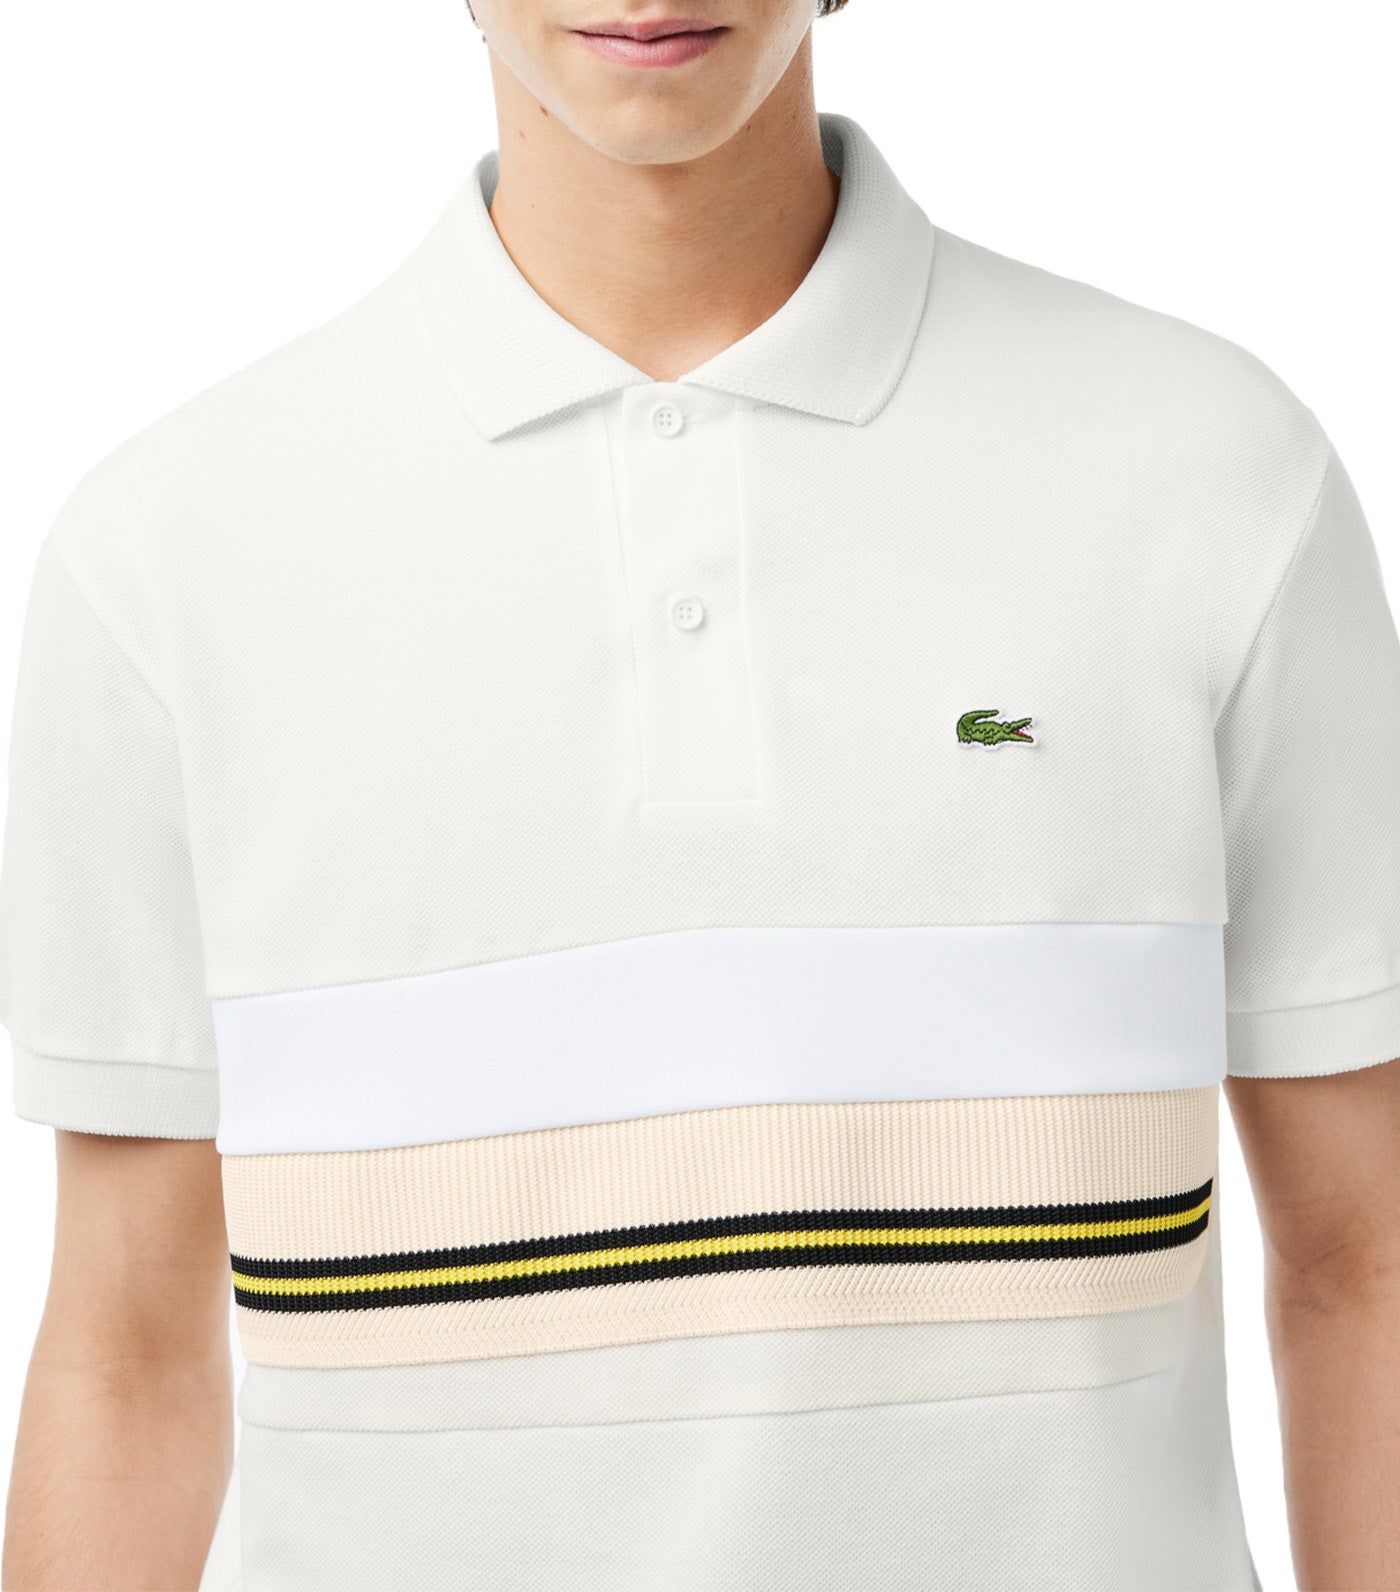 Made French Polo Flour Stripe Shirt Lacoste Contrast